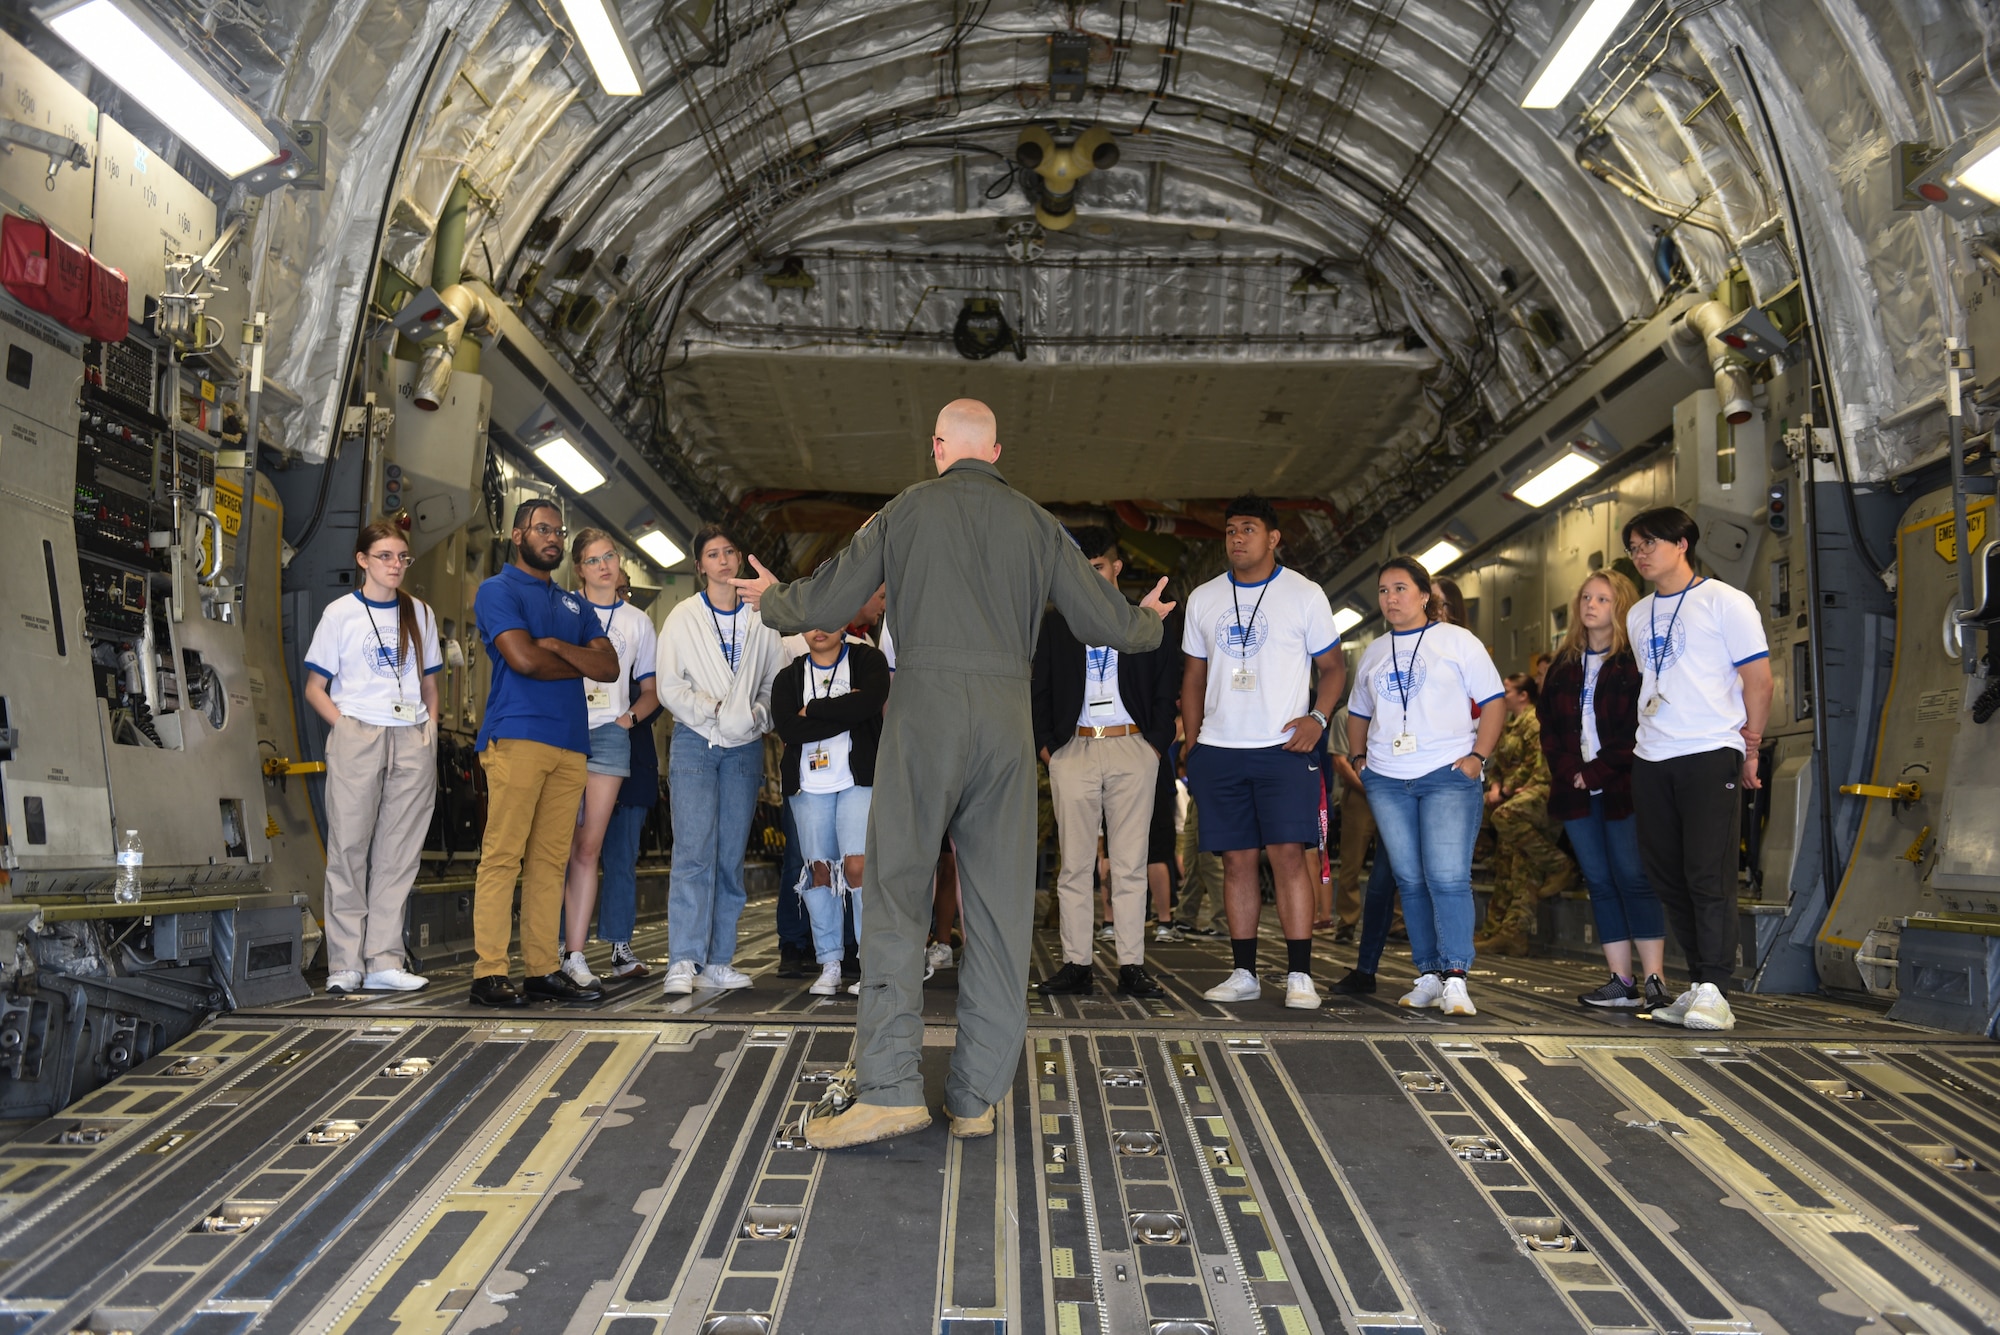 Northwest Youth Leadership Conference attendees receive a tour of a C-17 Globemaster III as part of Aviation Inspiration and Mentorship (AIM) Wing event at Joint Base Lewis-McChord, Washington, June 28, 2022. AIM Wing is a community outreach program to inform, influence and inspire the next generation of Air Force aviators. (U.S. Air Force photo by Master Sgt Julius Delos Reyes)